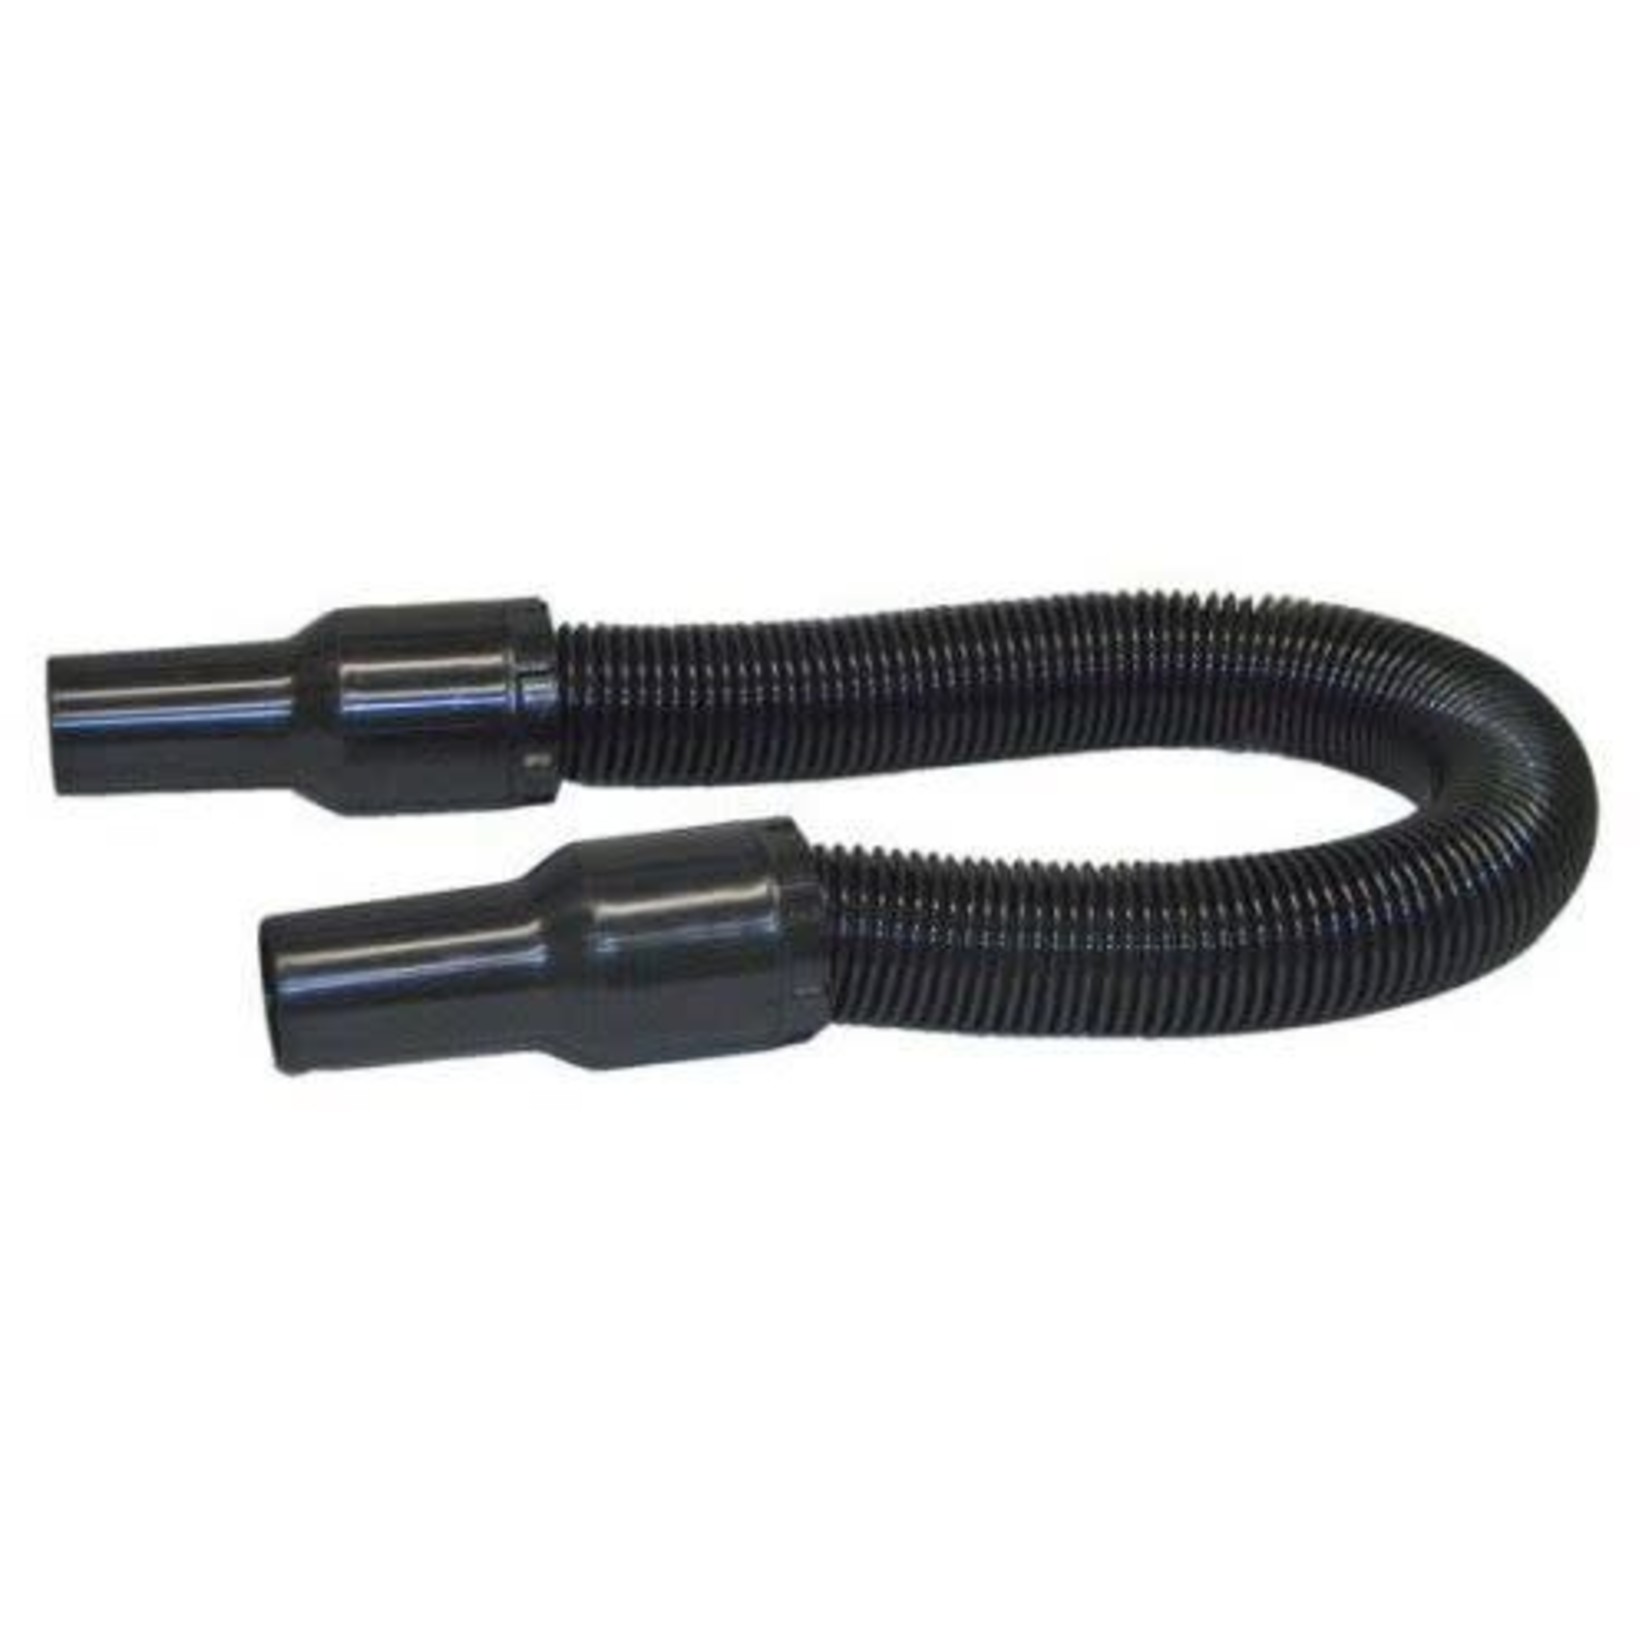 Lindhaus Lindhaus Stretch Hose Assembly - Fits Healthcare Pro